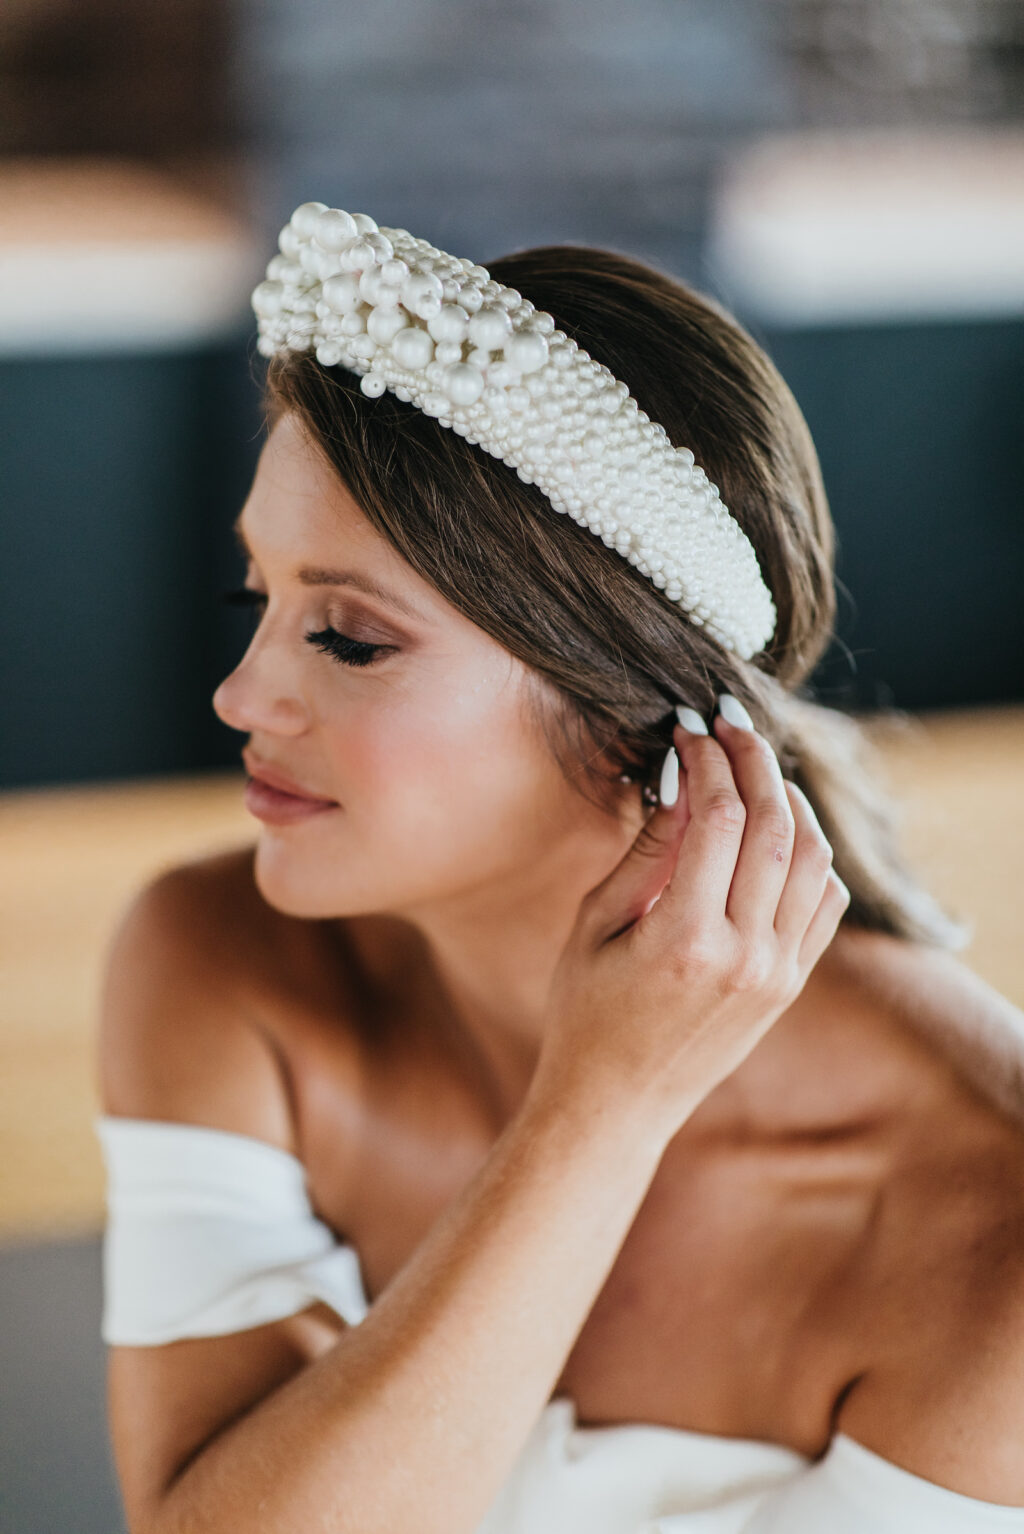 Modern and Edgy Fall Wedding, Bride Wearing Elaborate Thick Pearl Headband and Off the Shoulder Wedding Dress